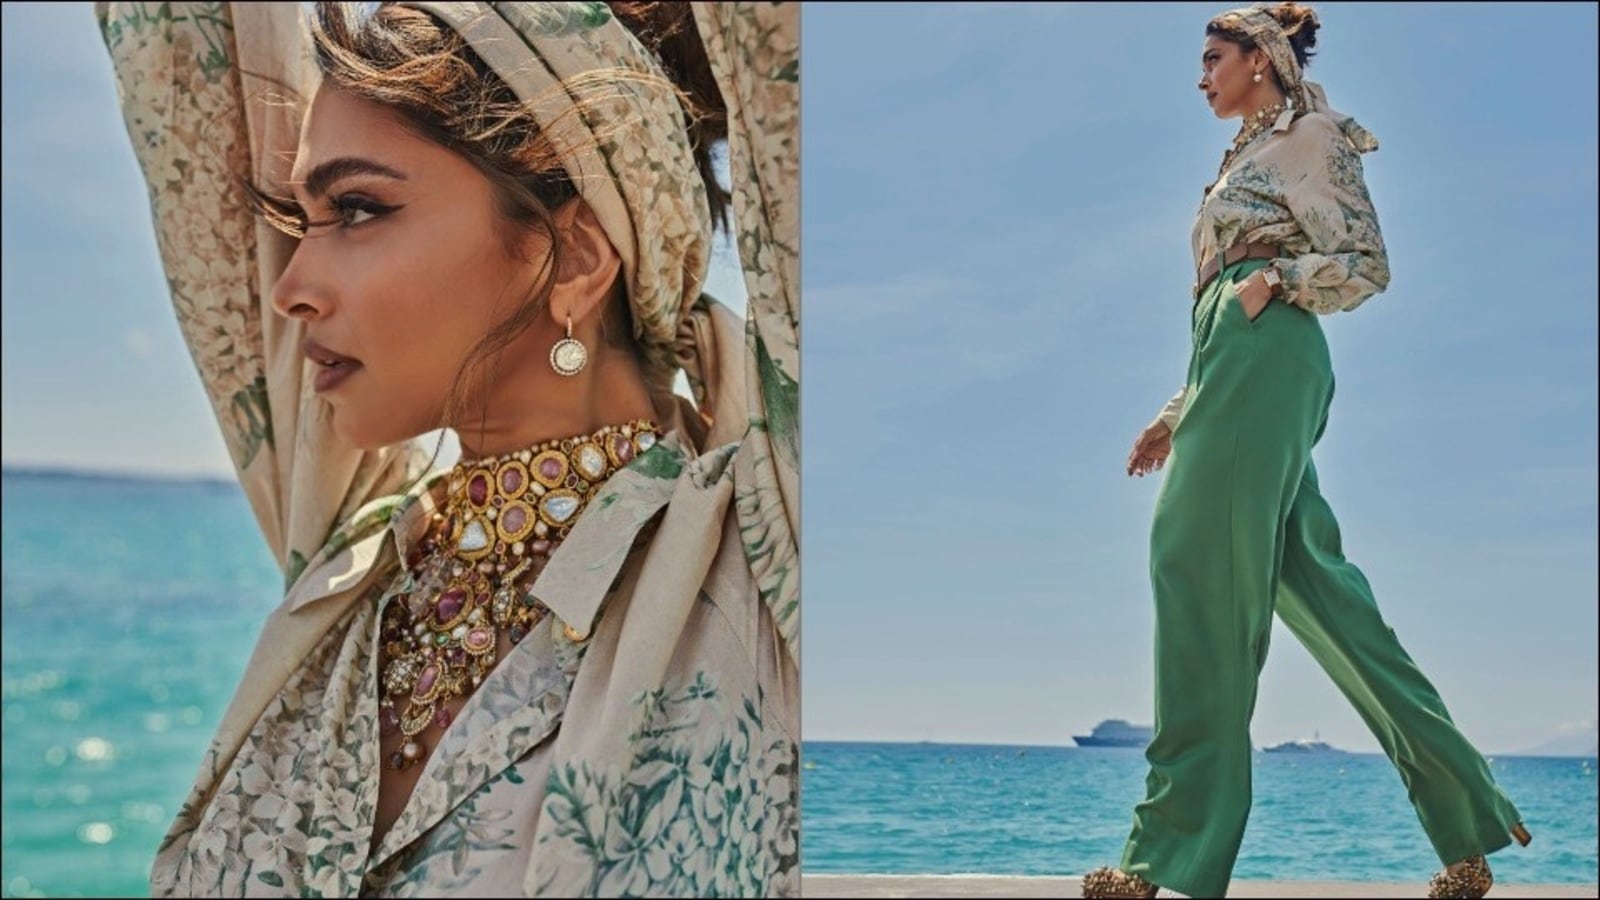 Deepika Padukone's First Appearance At Cannes 2022: The Actress